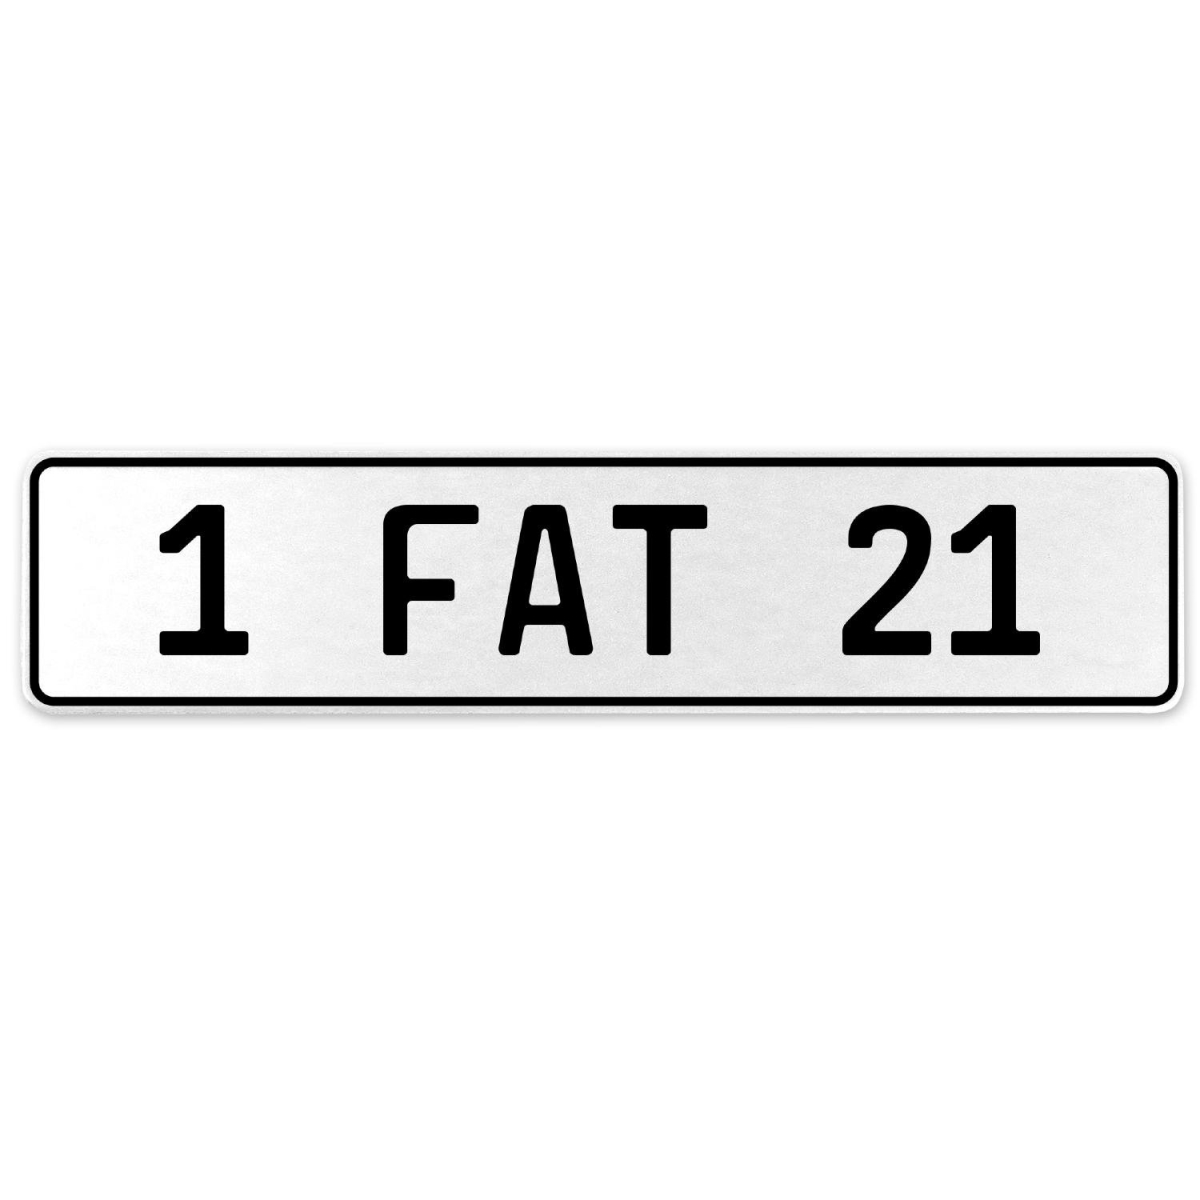 554618 1 Fat 21 - White Aluminum Street Sign Mancave Euro Plate Name Door Sign Wall